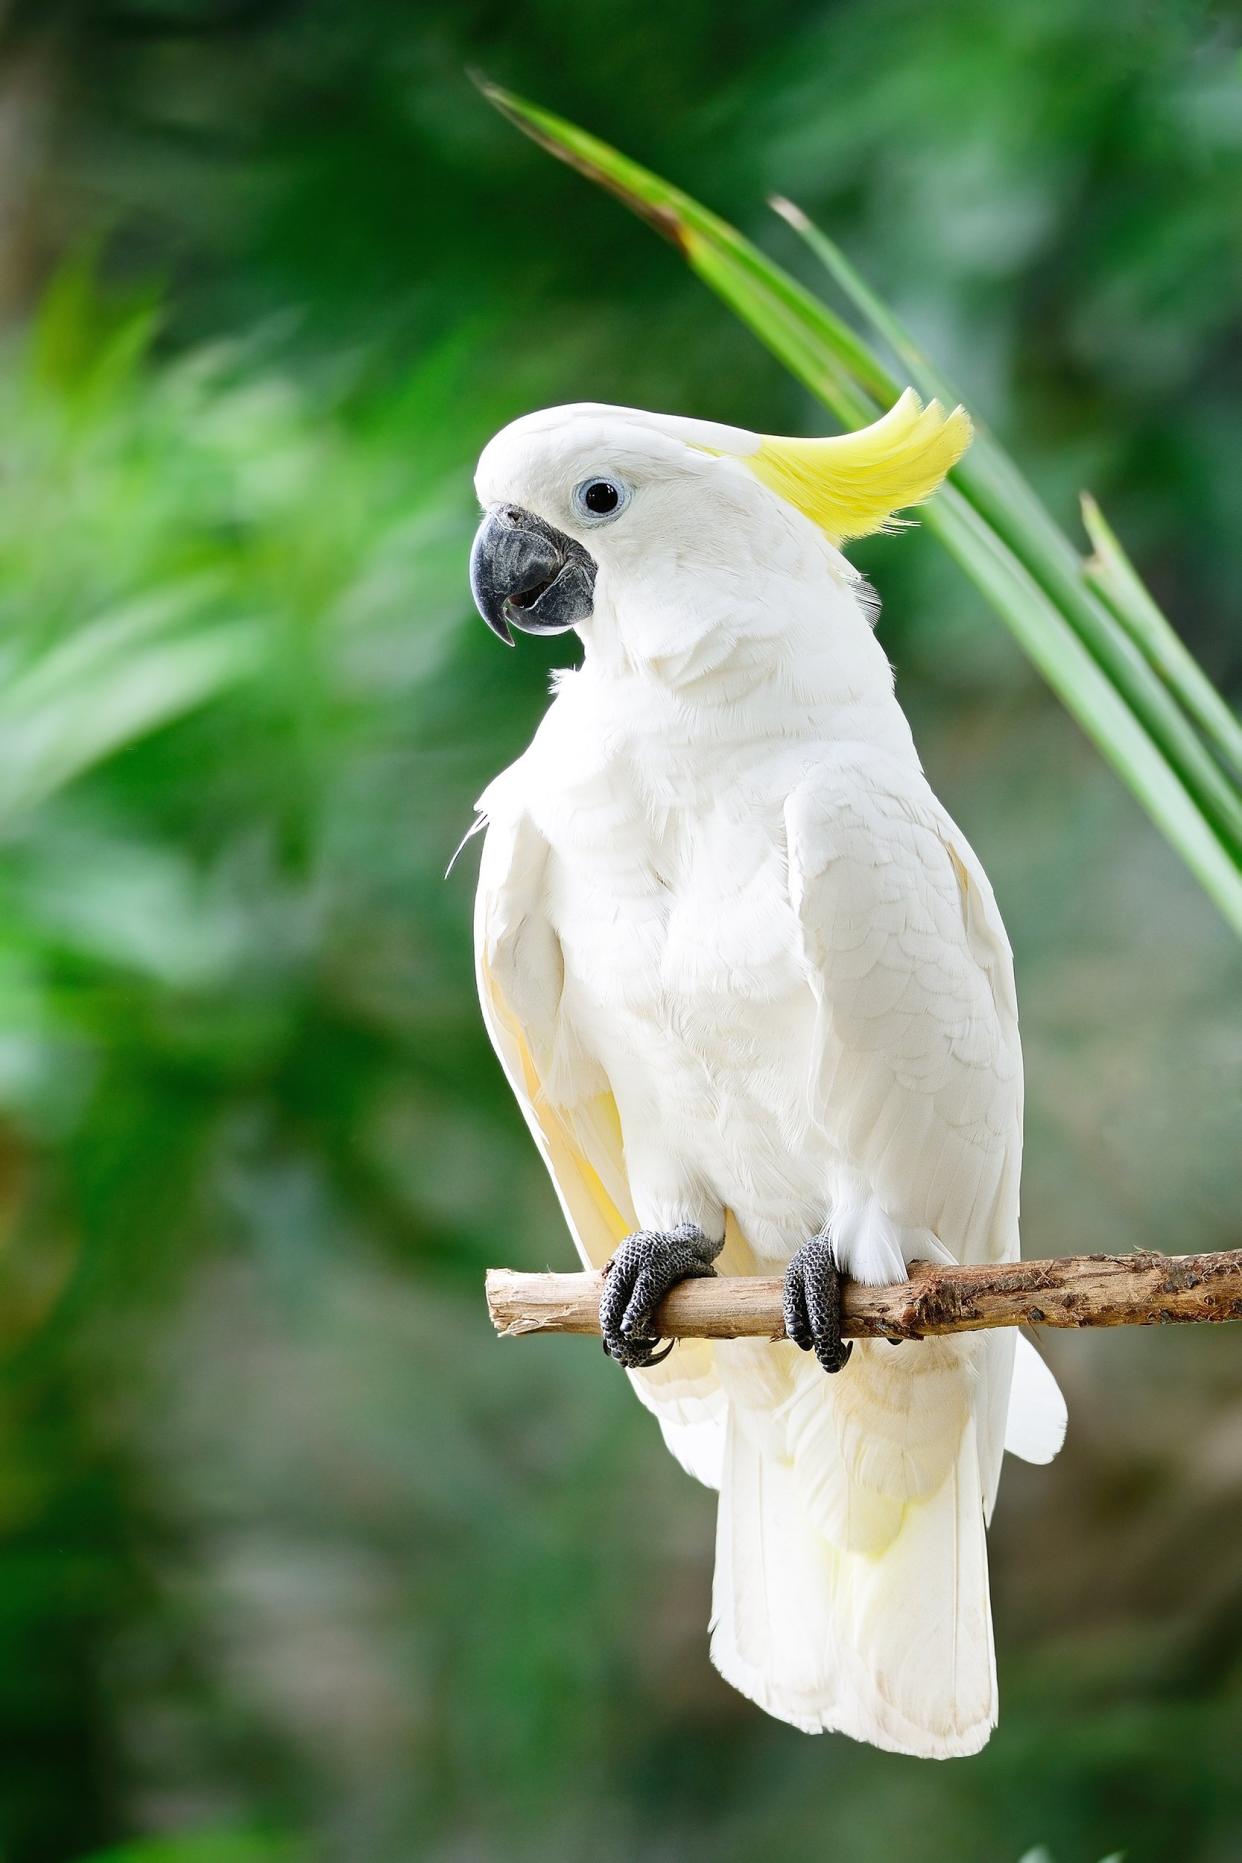 Sulphur-crested Cockatoo perched on a branch